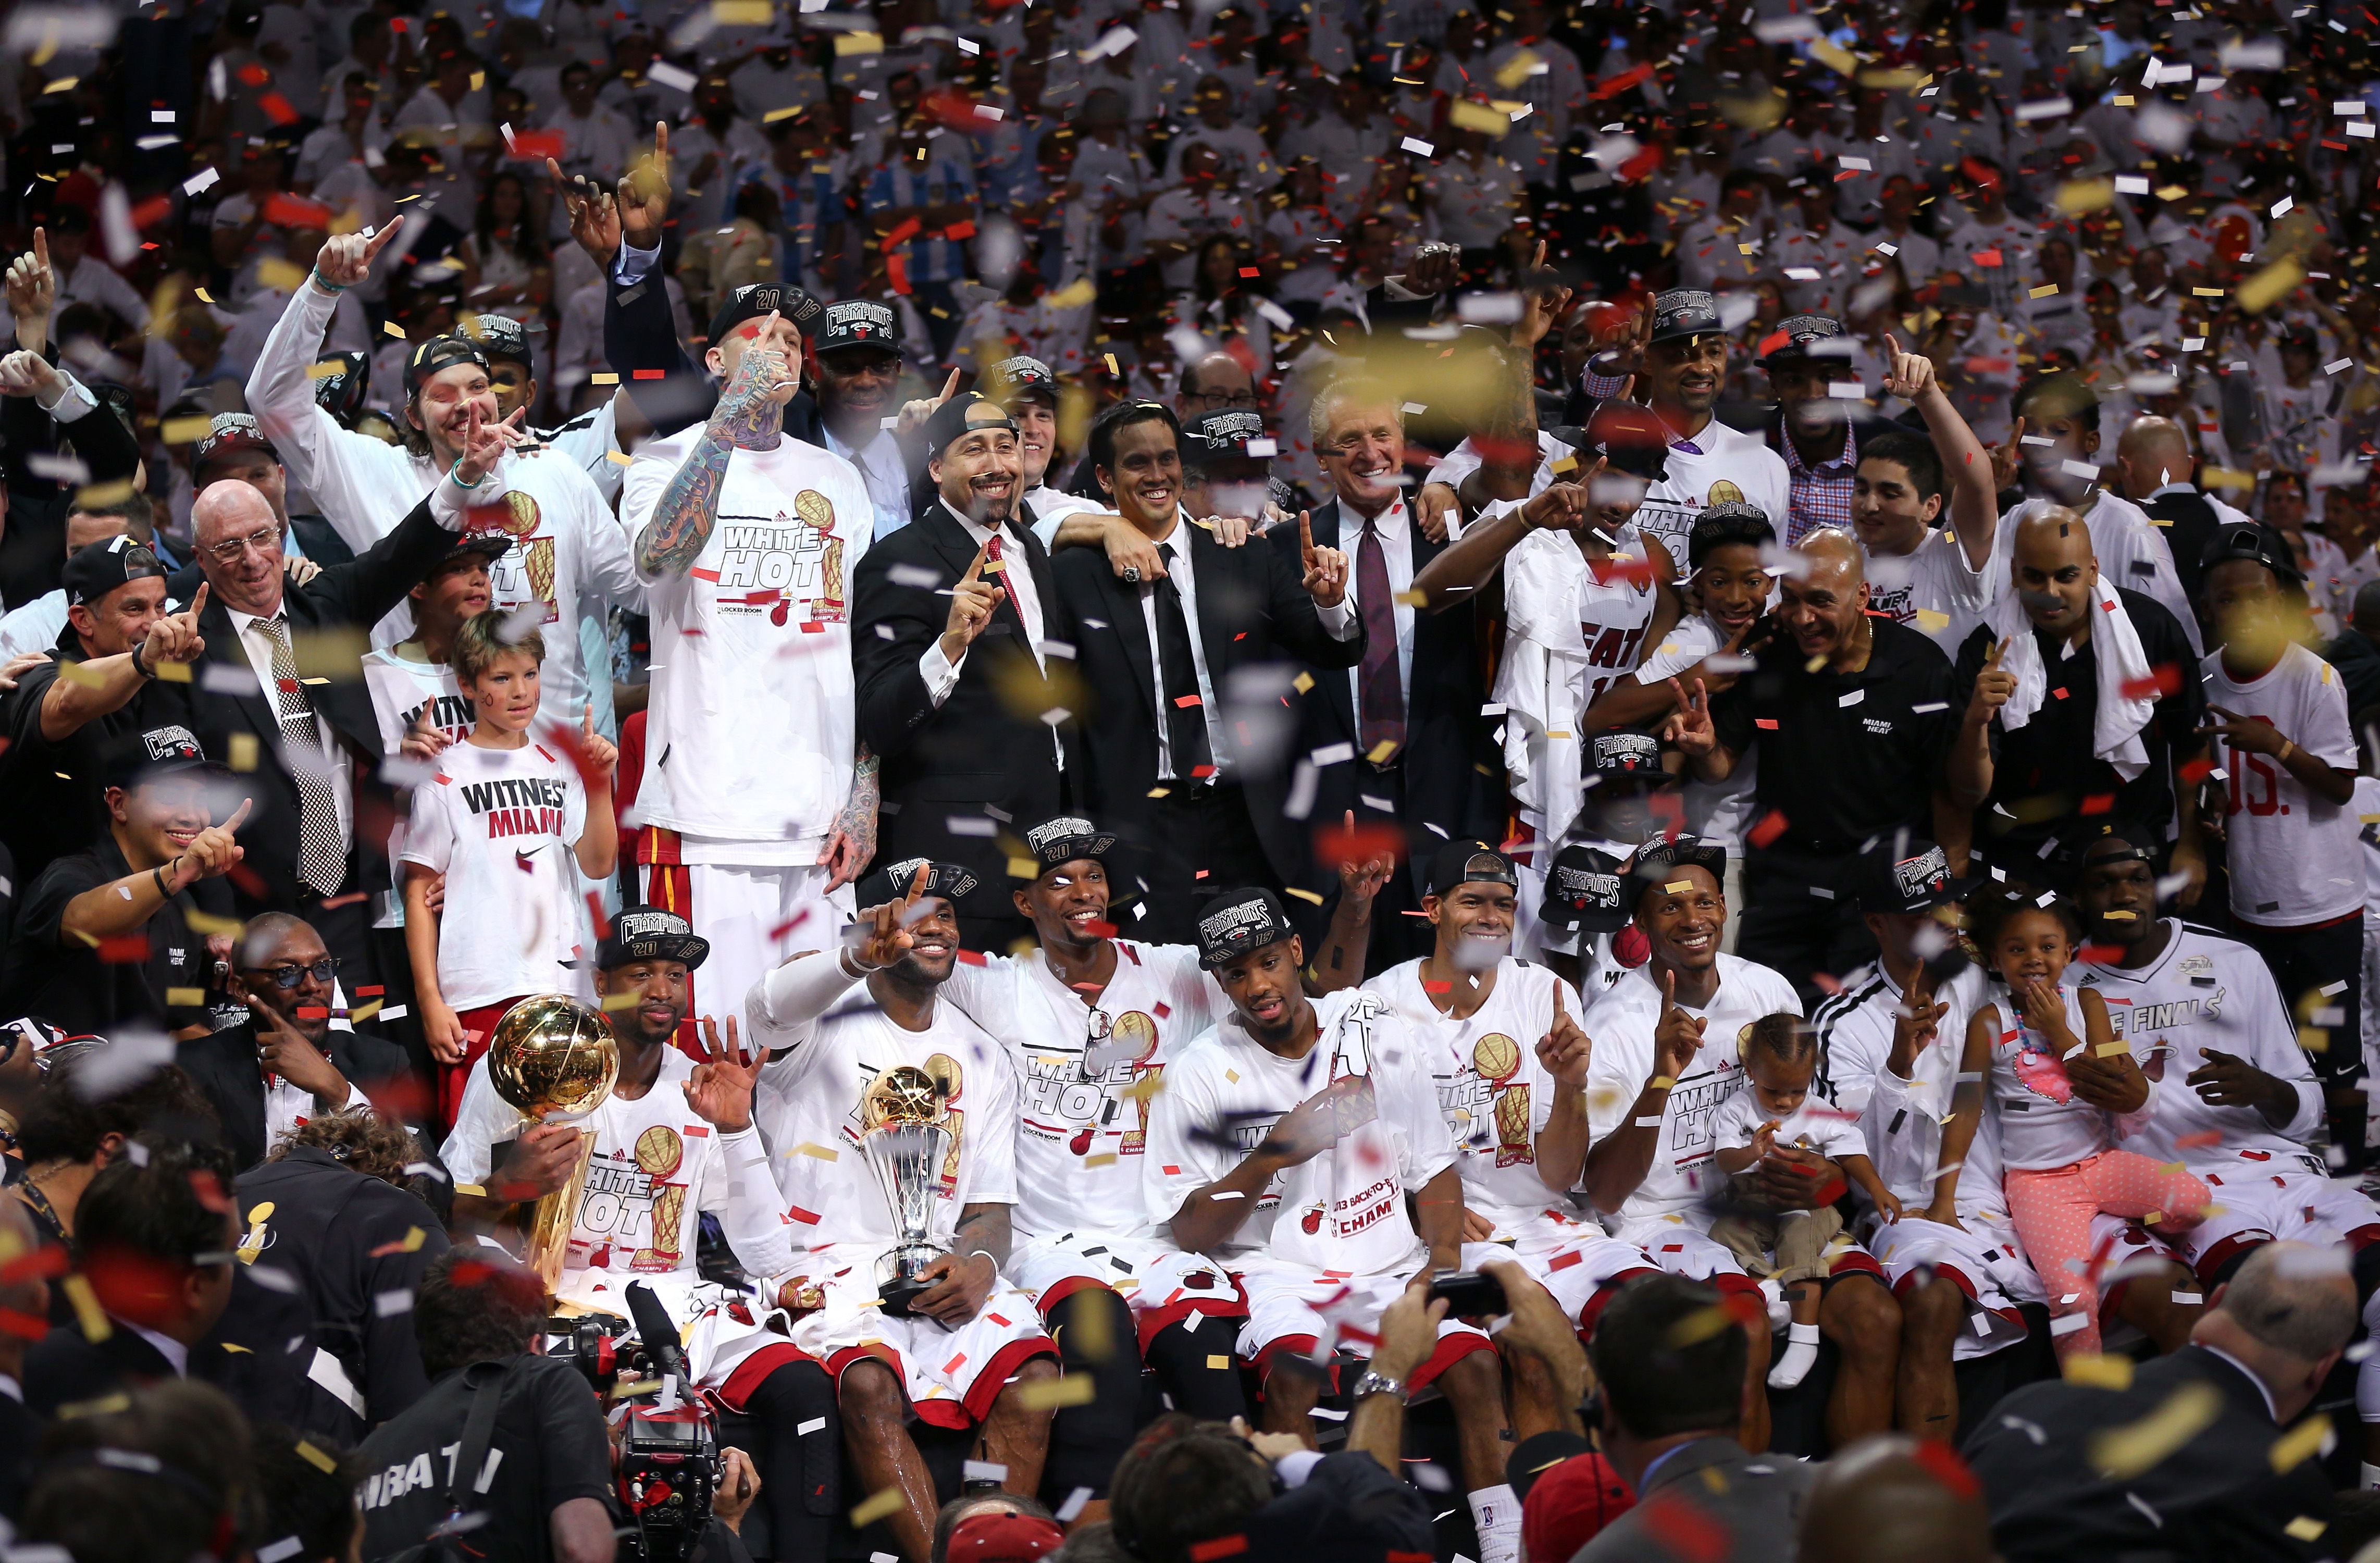 In major season finale, LeBron James leads Heat to another NBA title